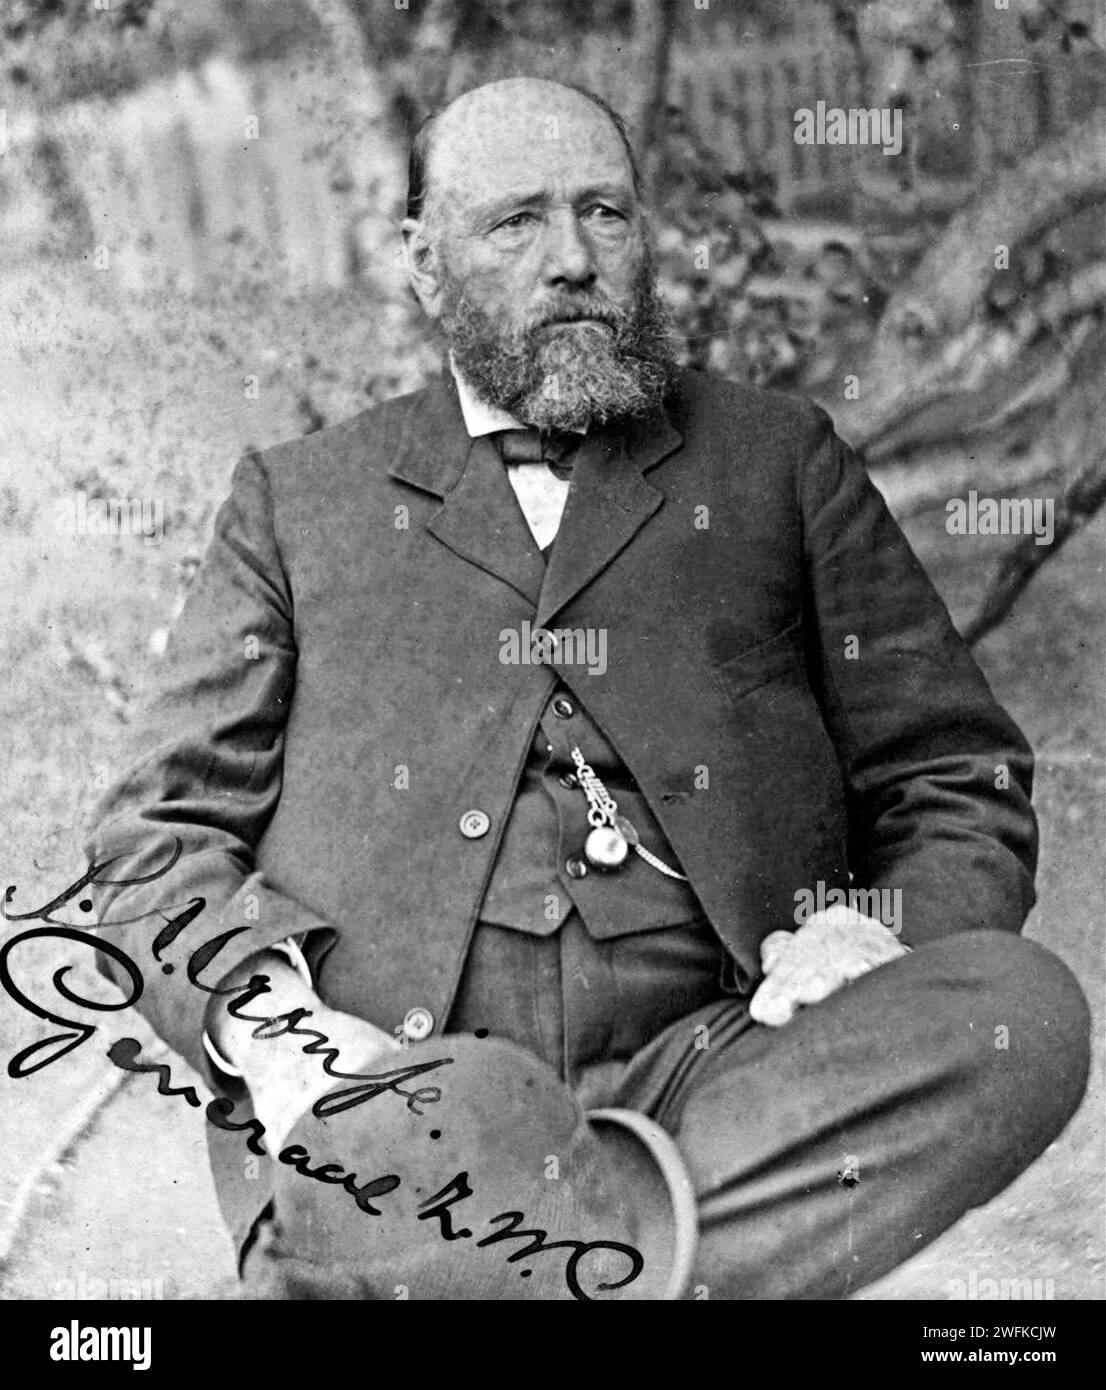 PIET CRONJÉ   (1836-1911) South African Boer general during the Boer Wars photographed while in exile on St. Helena after his defeat at Paardeberg in February b1900. Stock Photo